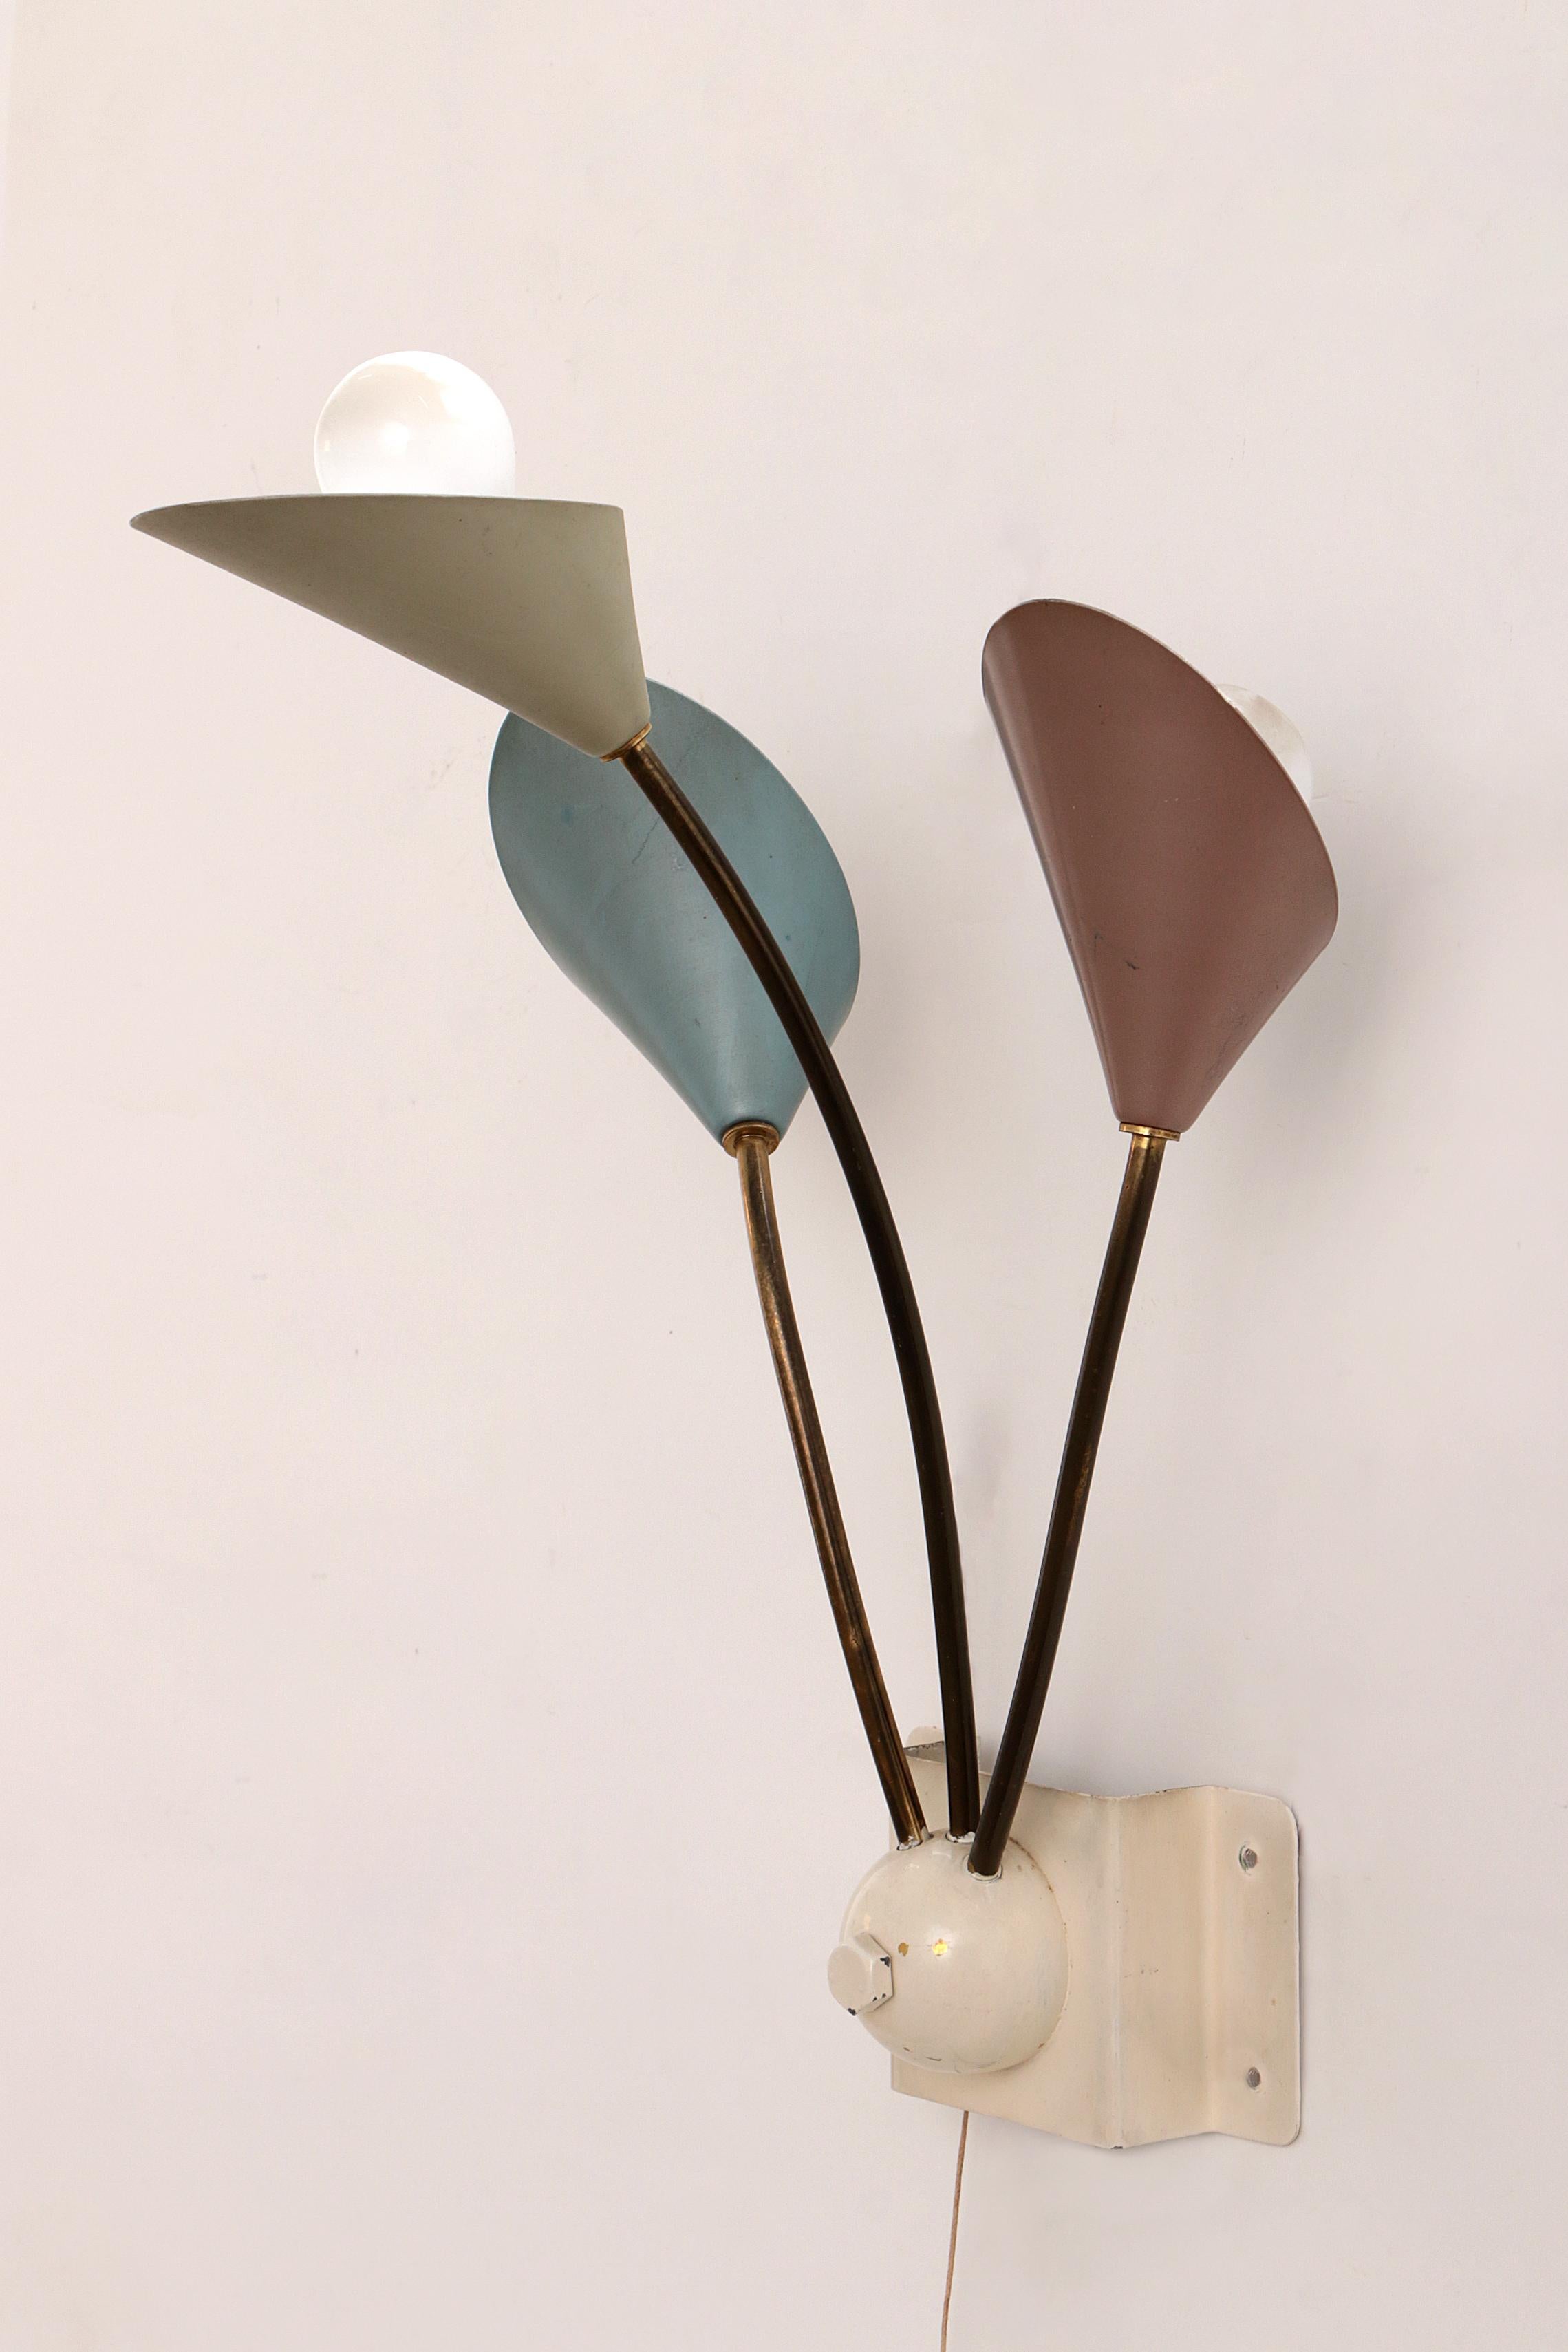 Danish Vintage Wall Lamp with 3 Lights - Brass Metal, 1960 Denmark For Sale